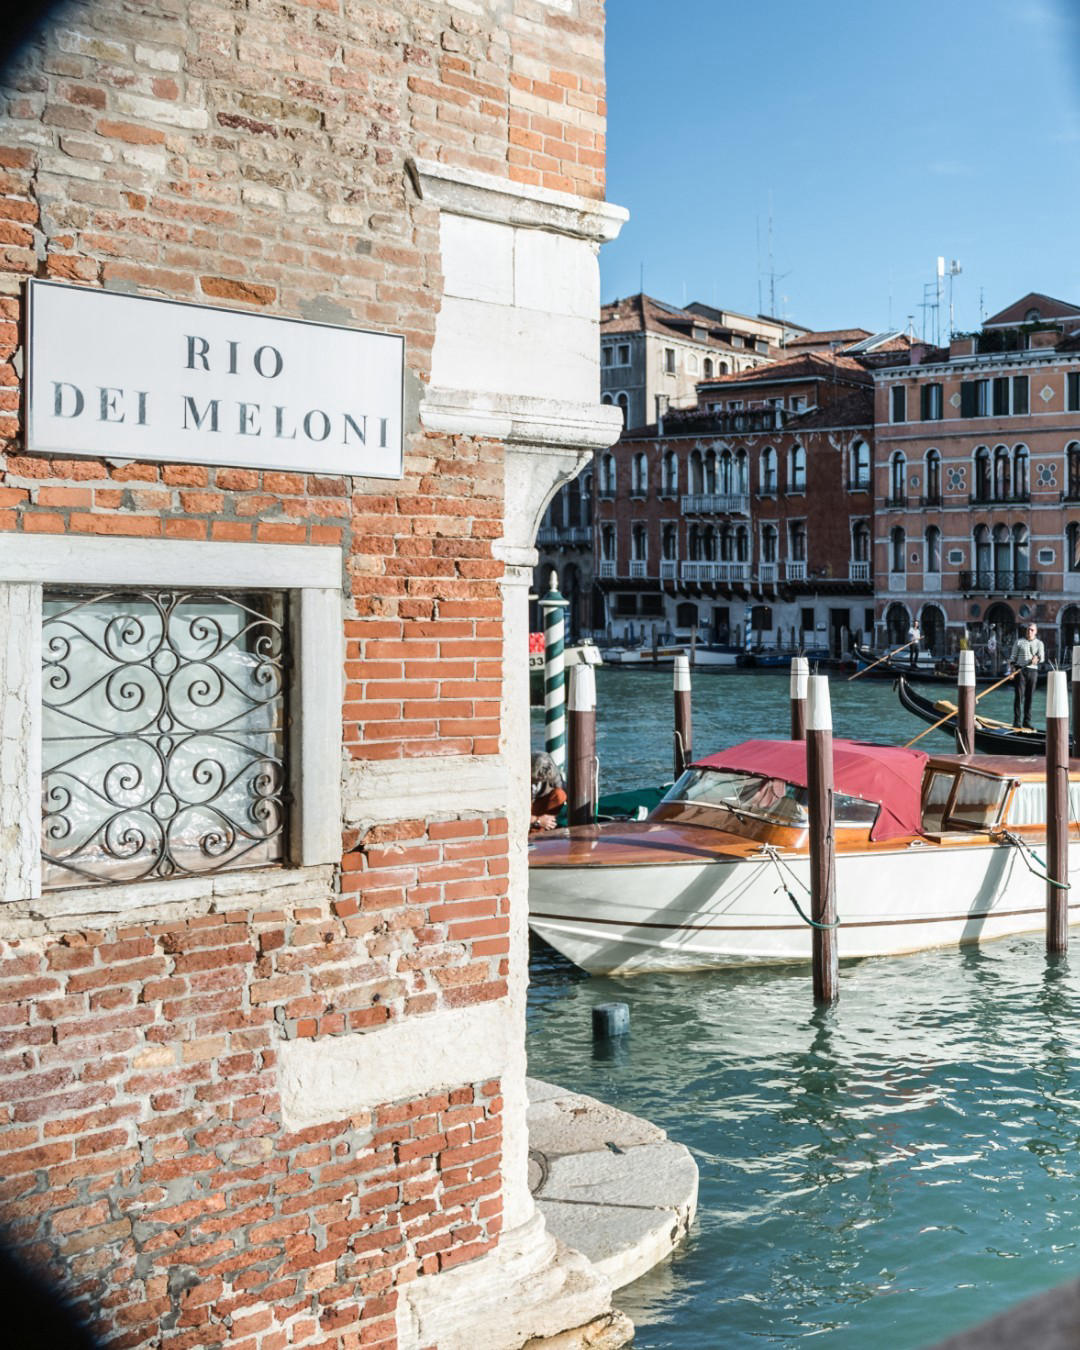 image  1 Aman Venice - From the legendary Piazzo San Marco and St Mark’s Basilica to the Palazzo Ducale and S